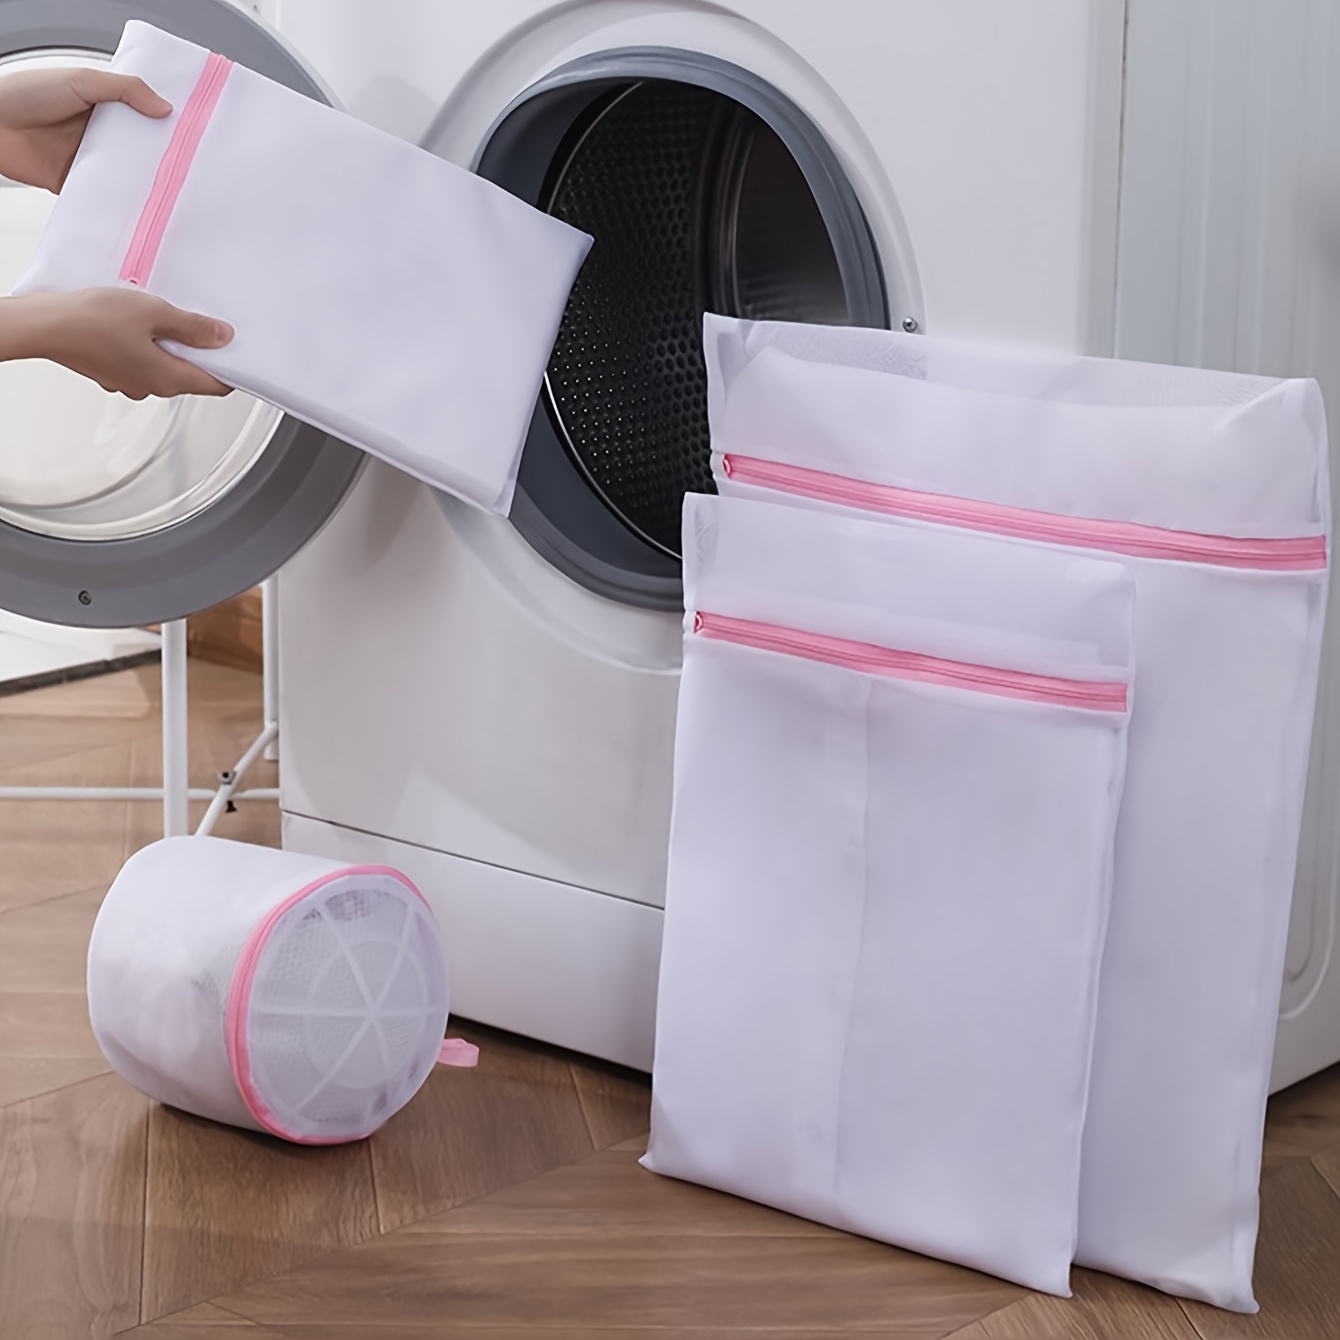 Home Mesh Laundry Bag 4-Pack Washing Bag with Zipper Lingerie Garment Bag  for Net Washer Dryer Washing Machine Protect Four Size - AliExpress